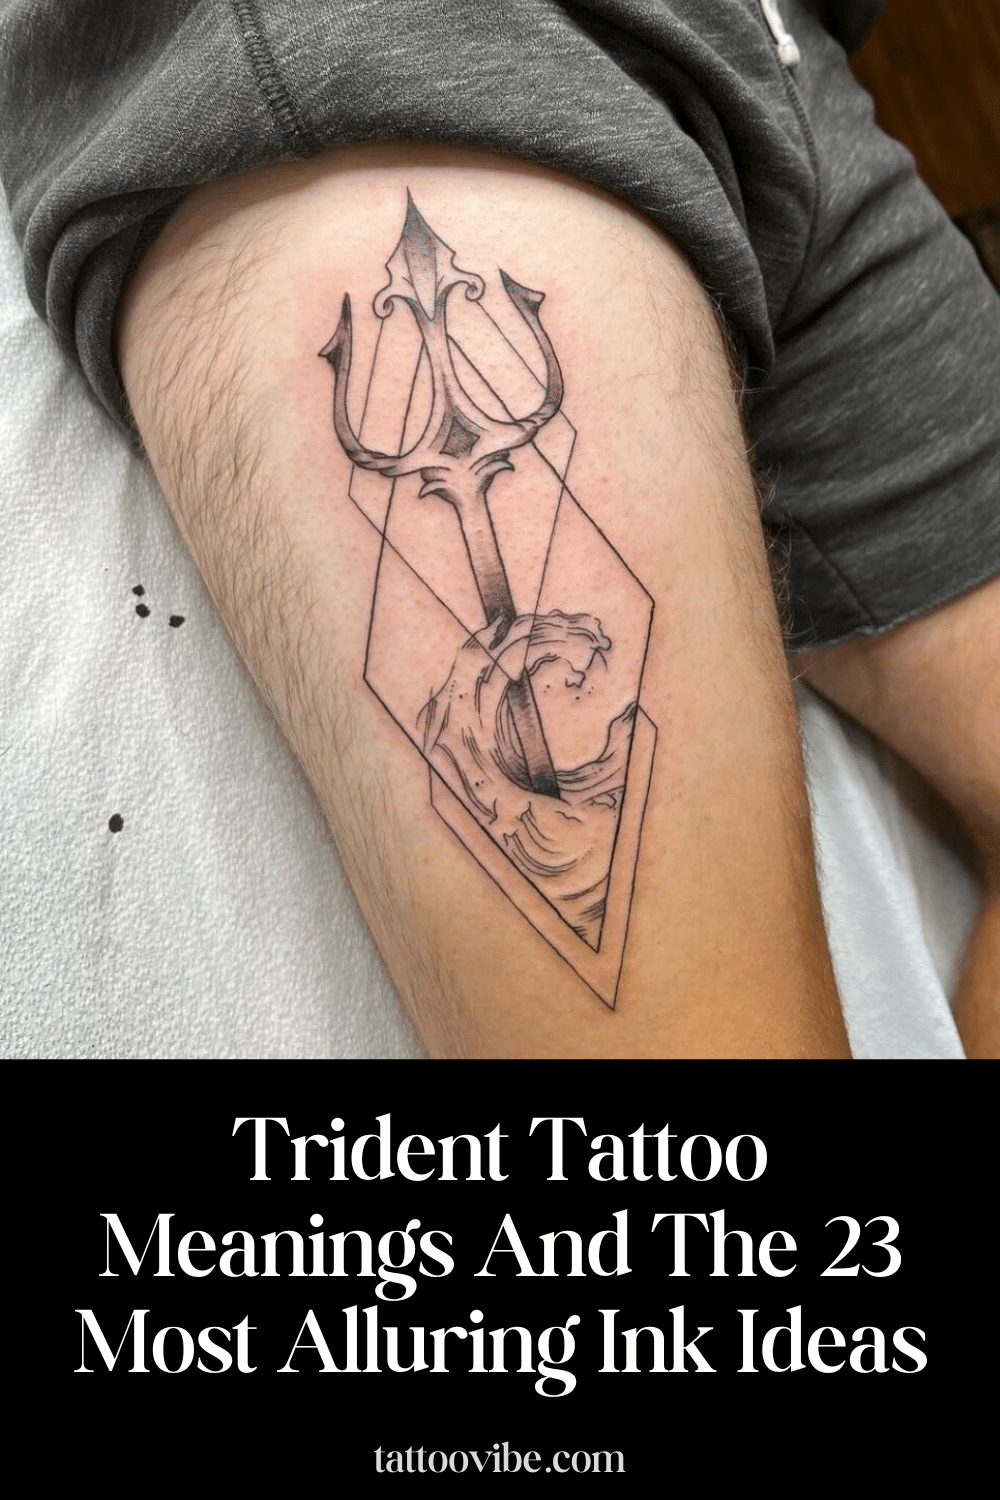 Trident Tattoo Meanings And The 23 Most Alluring Ink Ideas